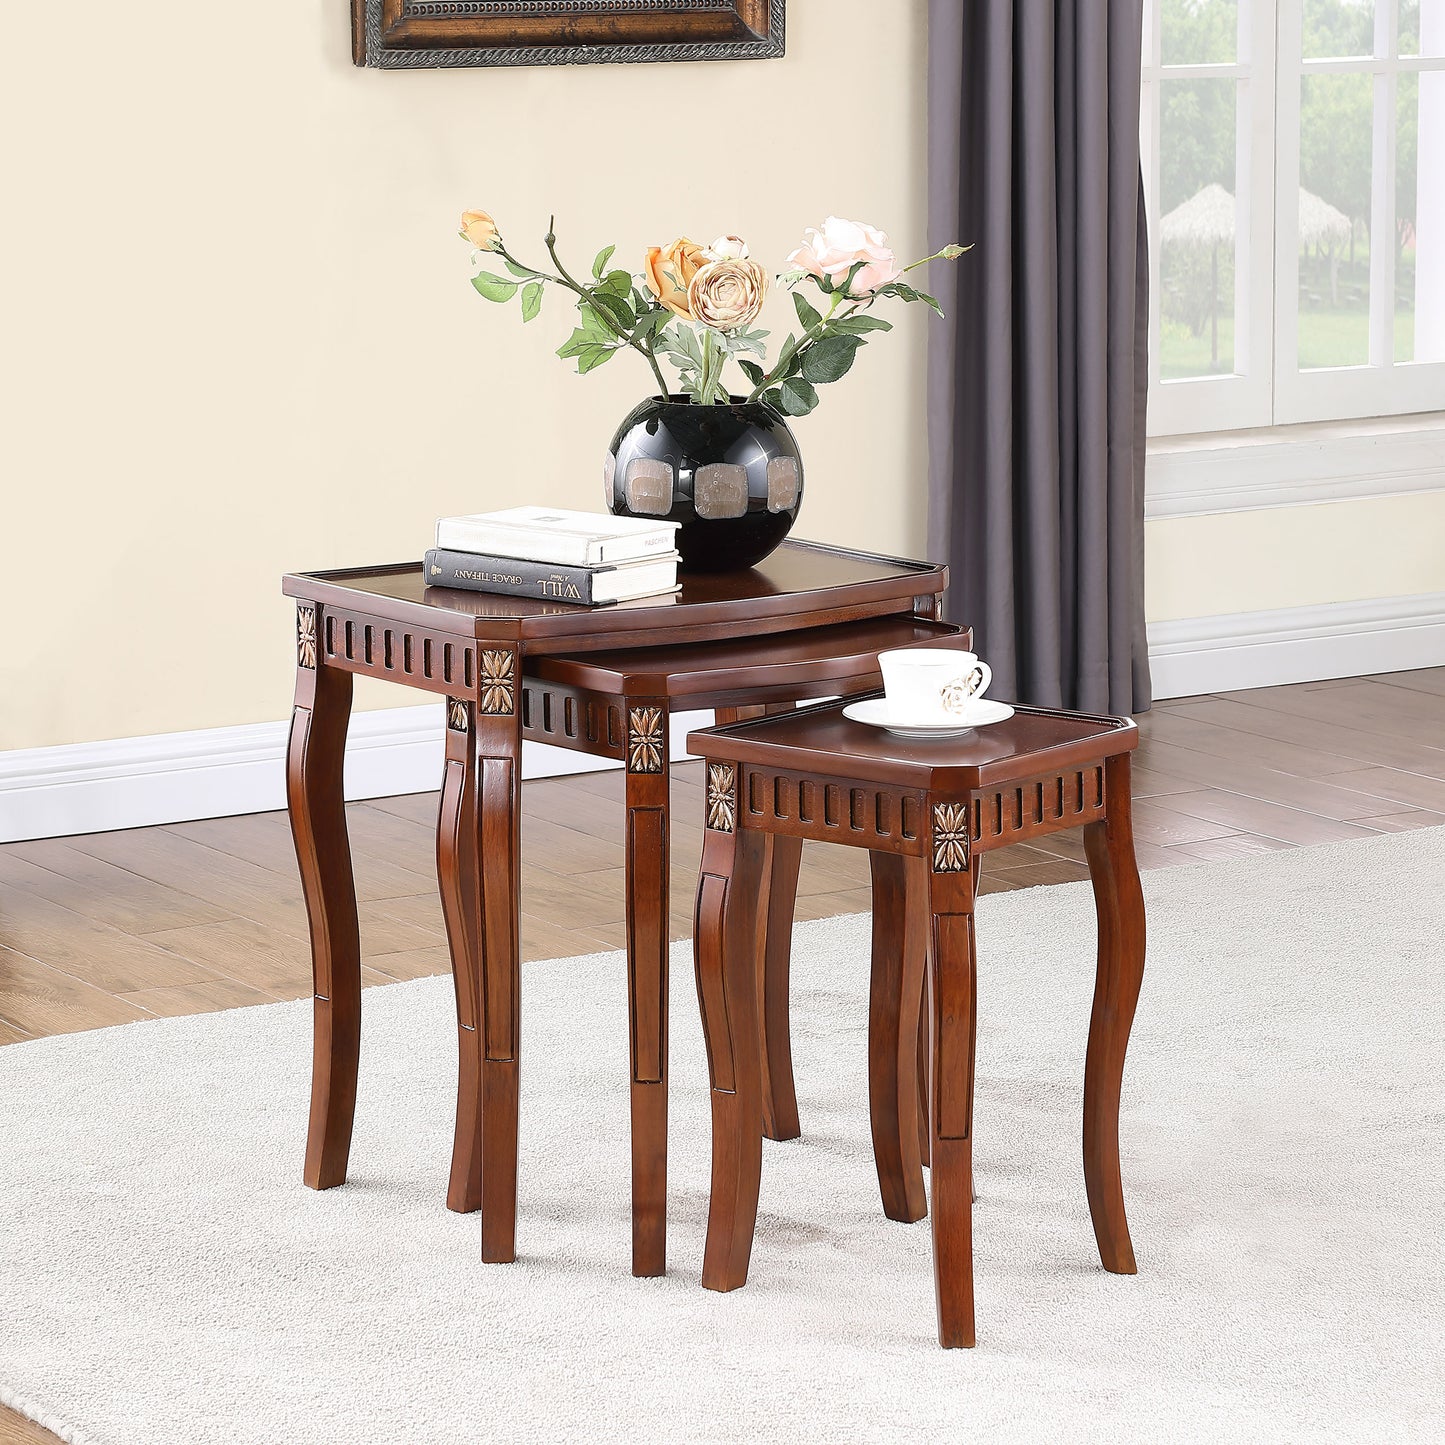 Daphne 3-piece Curved Leg Nesting Tables Warm Brown